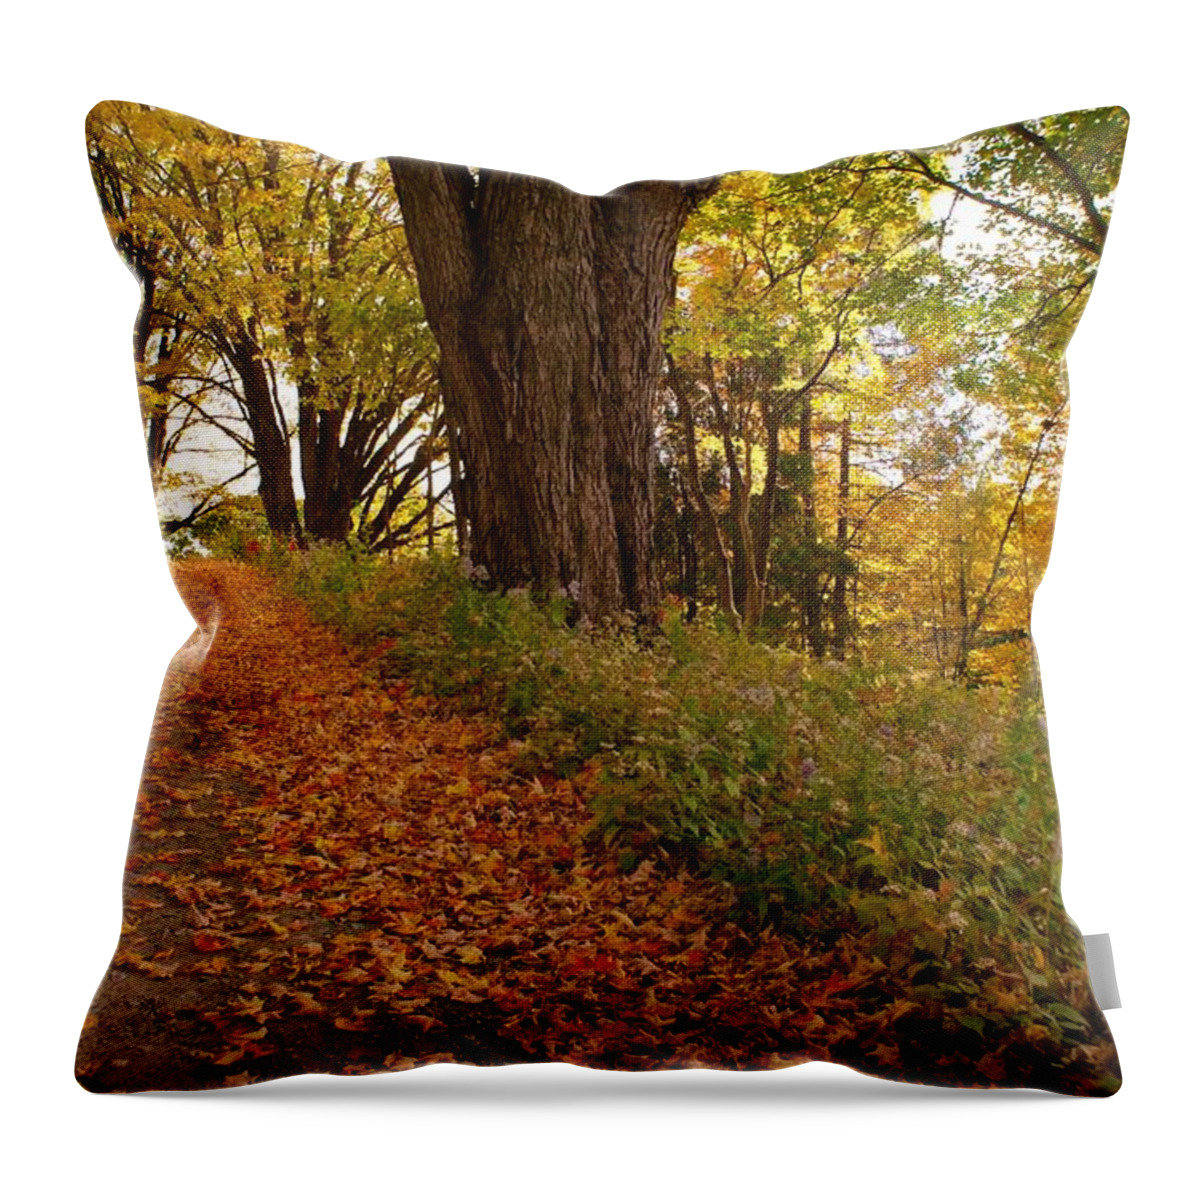 Fall Throw Pillow featuring the photograph Fall Driveway by Lois Lepisto